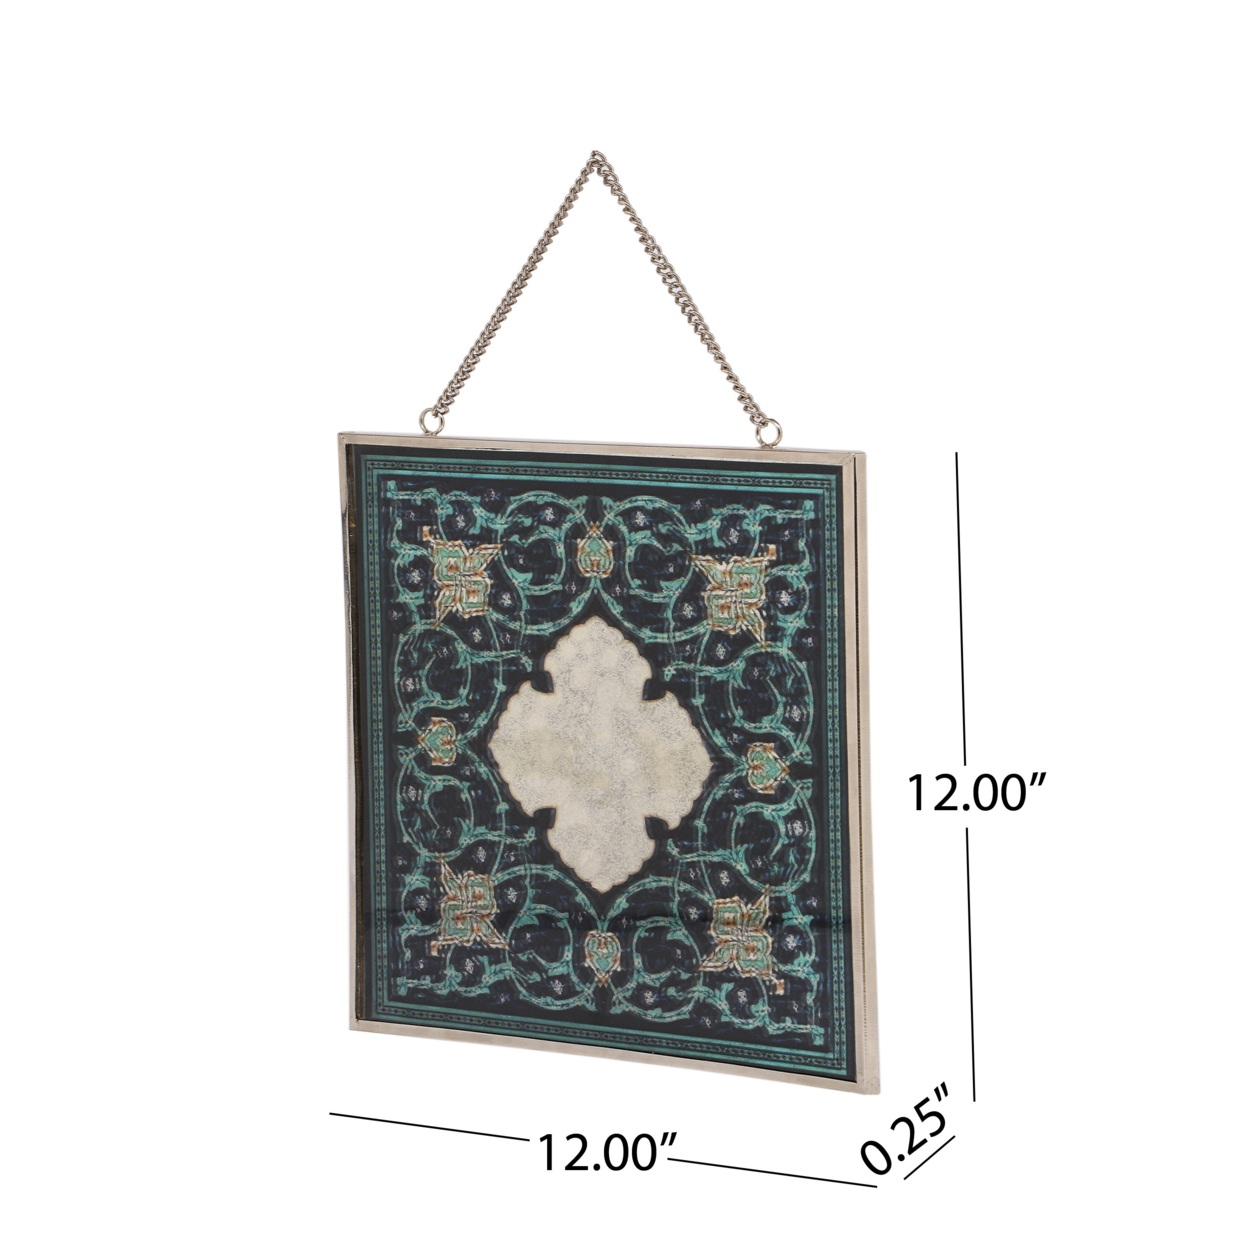 Marjorie Oriental Tempered Glass Wall Accessory